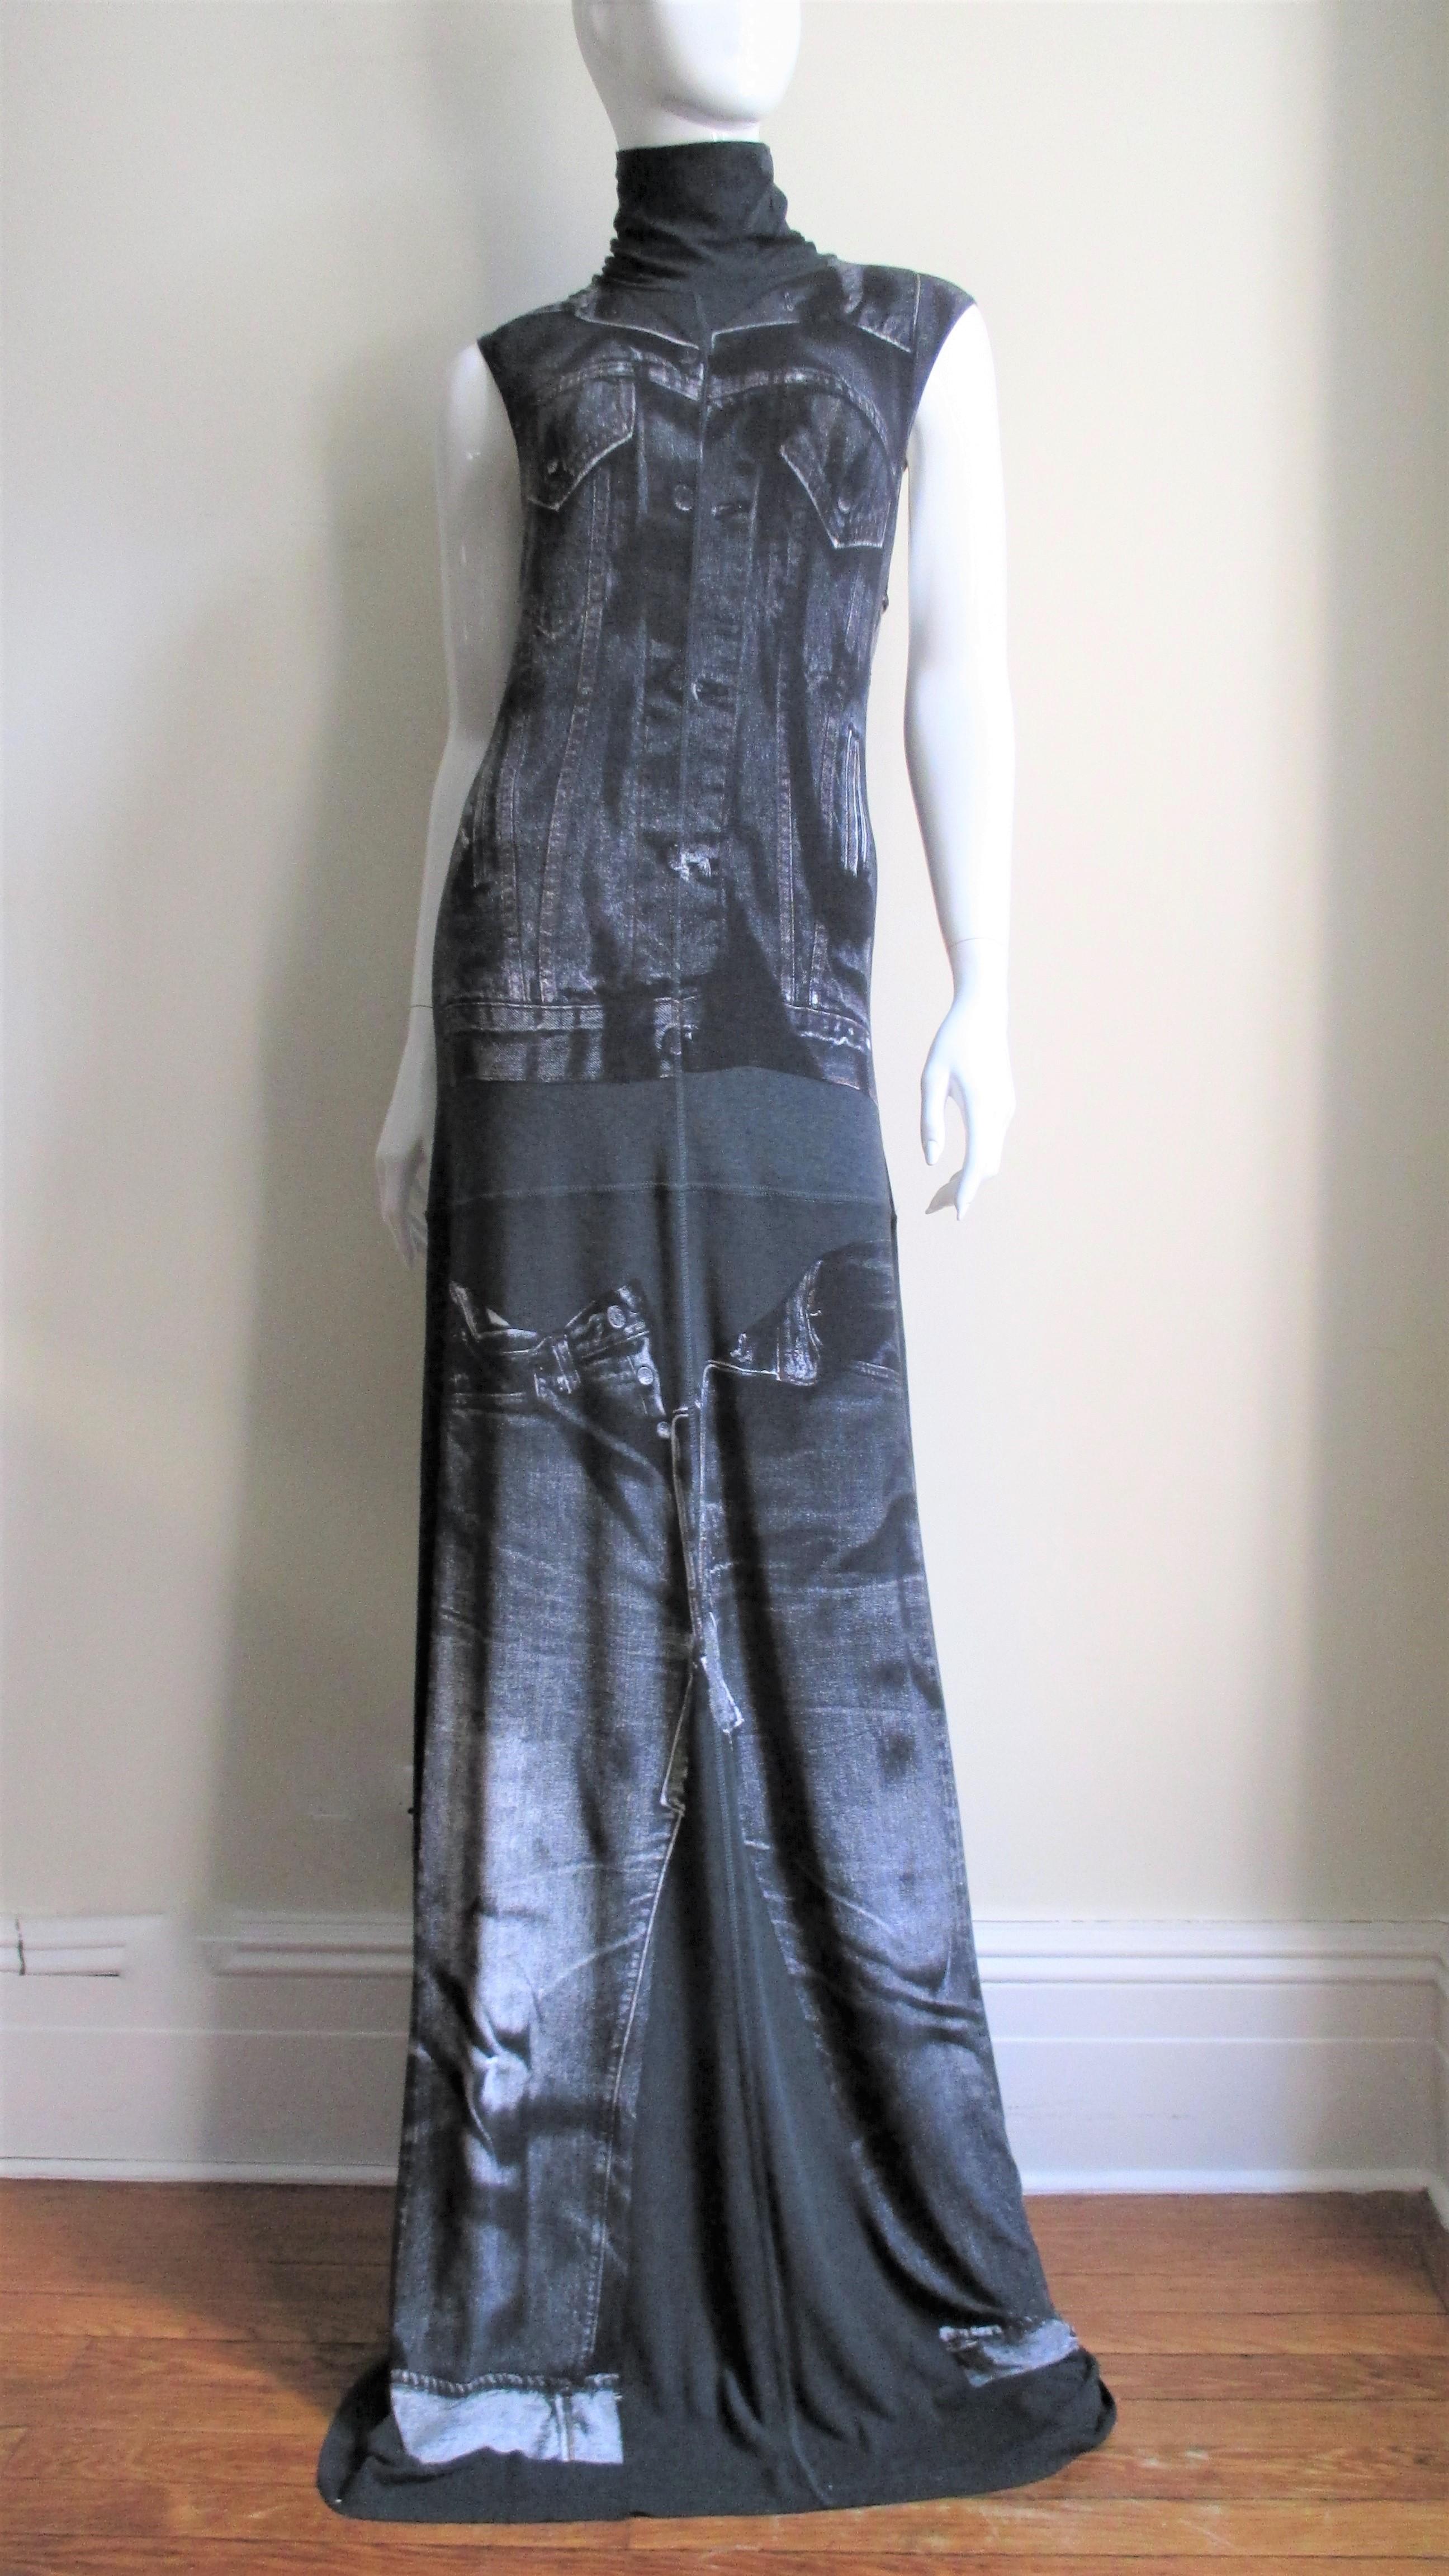 A great maxi dress from Jean Paul Gaultier in a black jersey with a trompe l'oeil jean jacket and jeans screen printed on the front and back.  It has a stand up collar and skims the body then flares to the hem.  It comes with fabulous separate